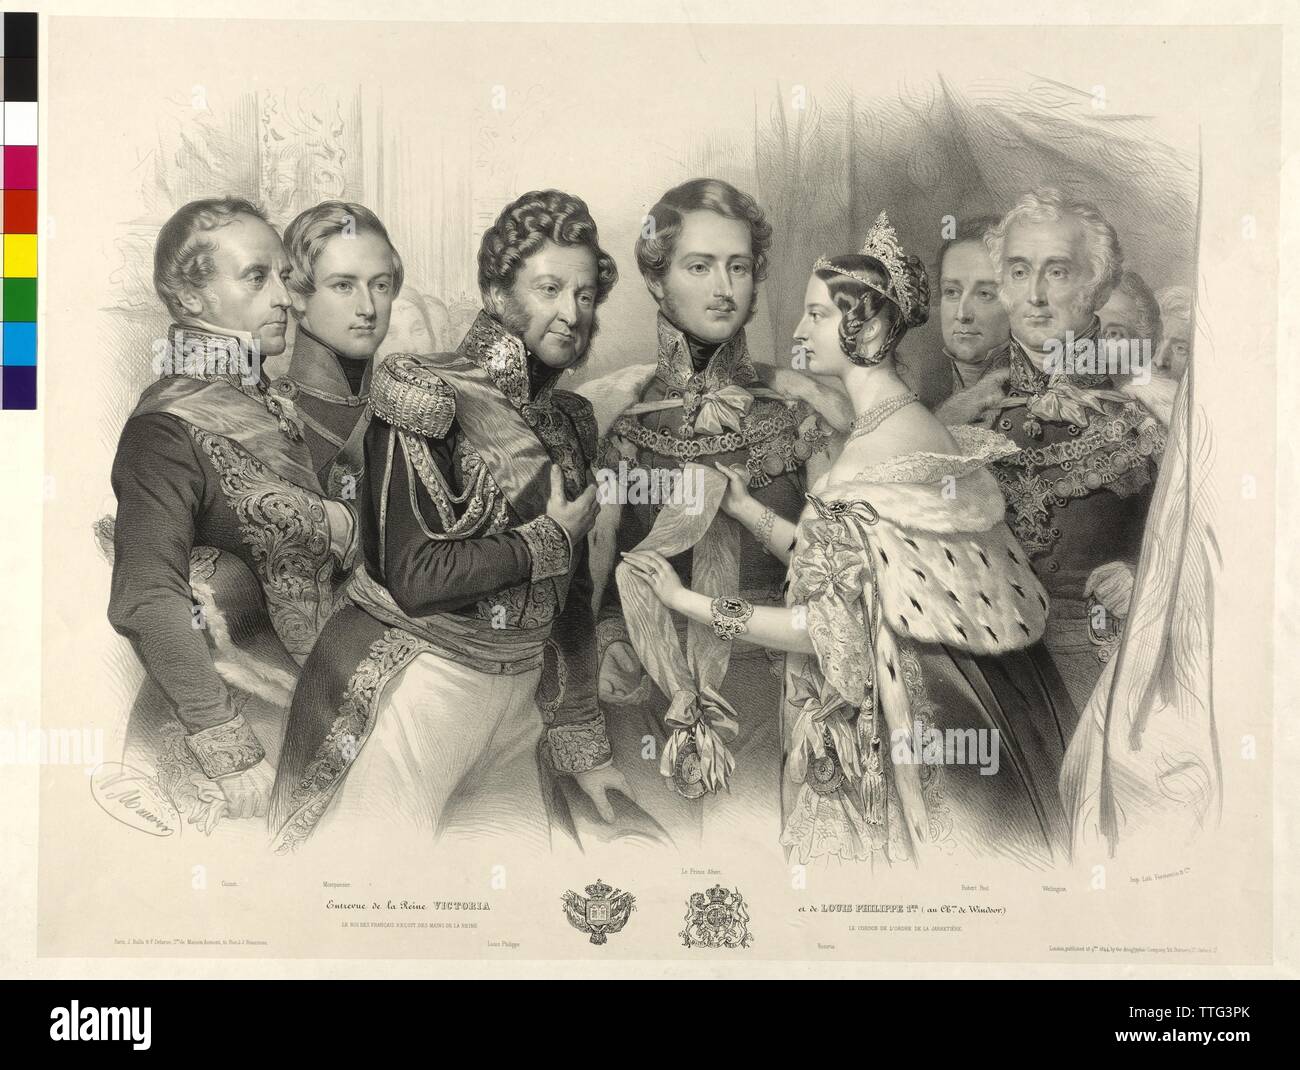 Queen Victoria of Great Britain present King Louis Philipp of France the Order of the Garter, group picture in the Windsor Palace, lithograph by Nicolas Eustache Maurin. coat of arms, Additional-Rights-Clearance-Info-Not-Available Stock Photo